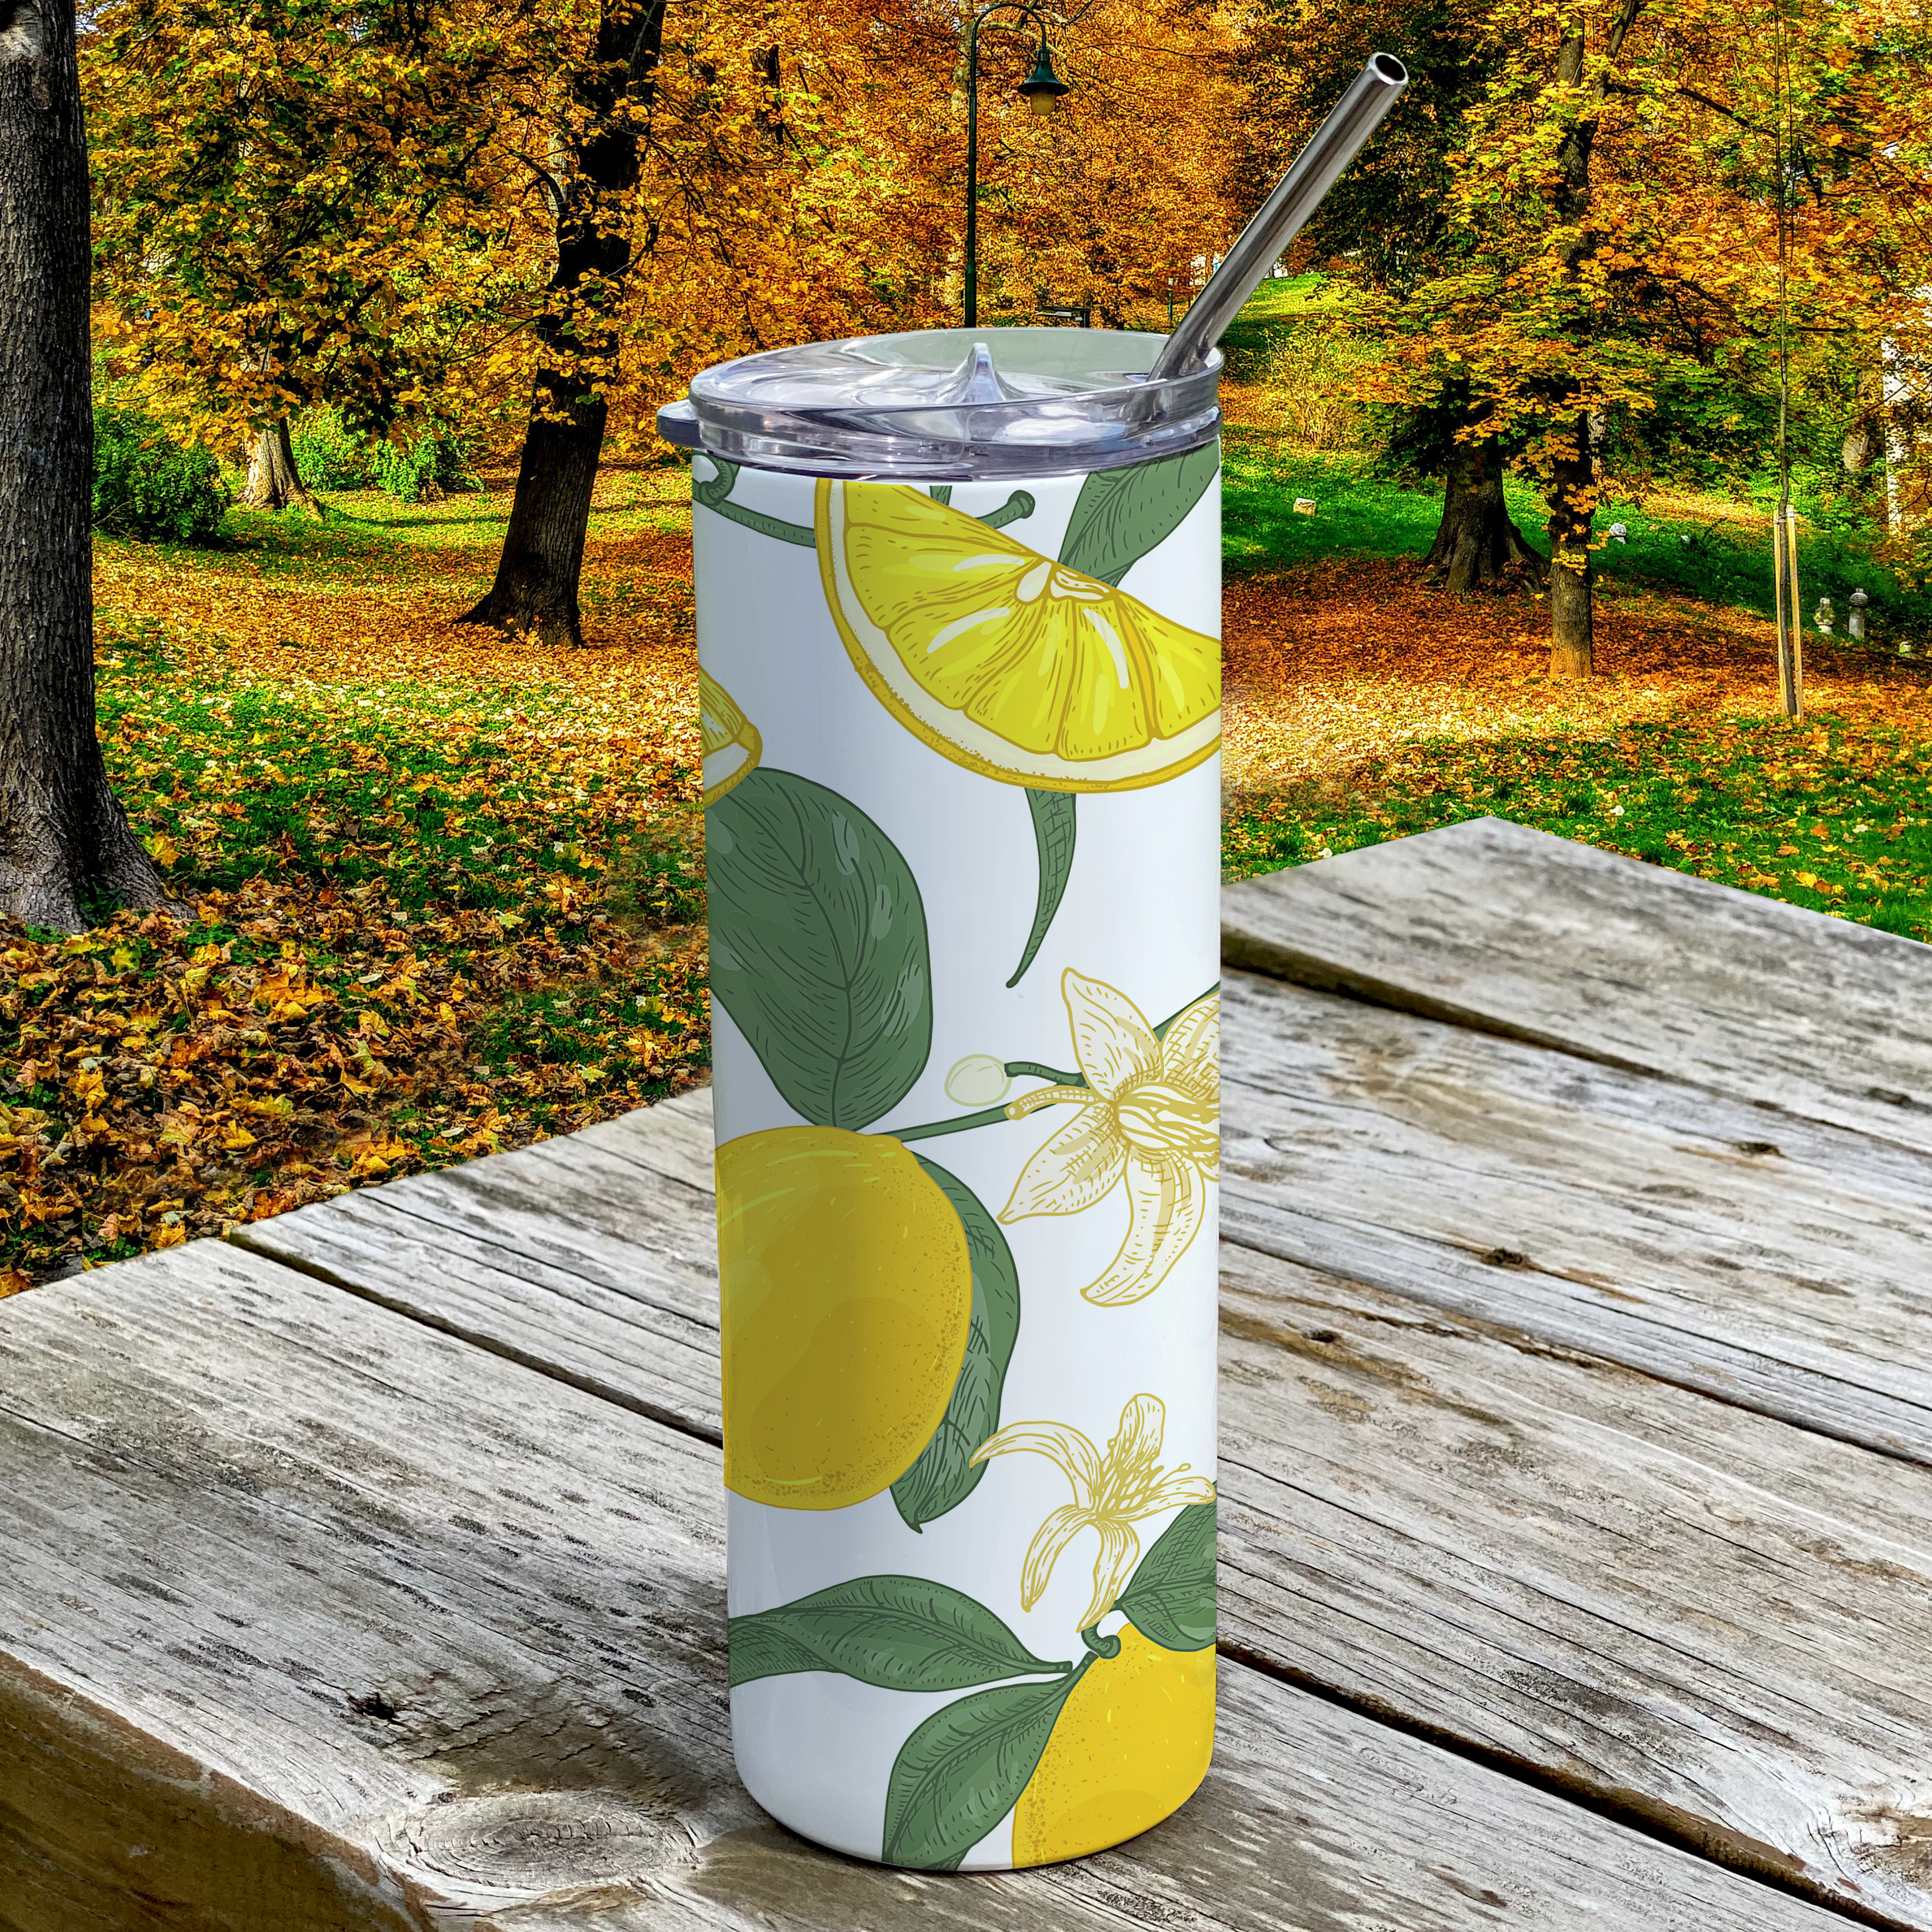 Trend Setters Originals (Lemons) 20 Oz Stainless Steel Travel Tumbler with Straw